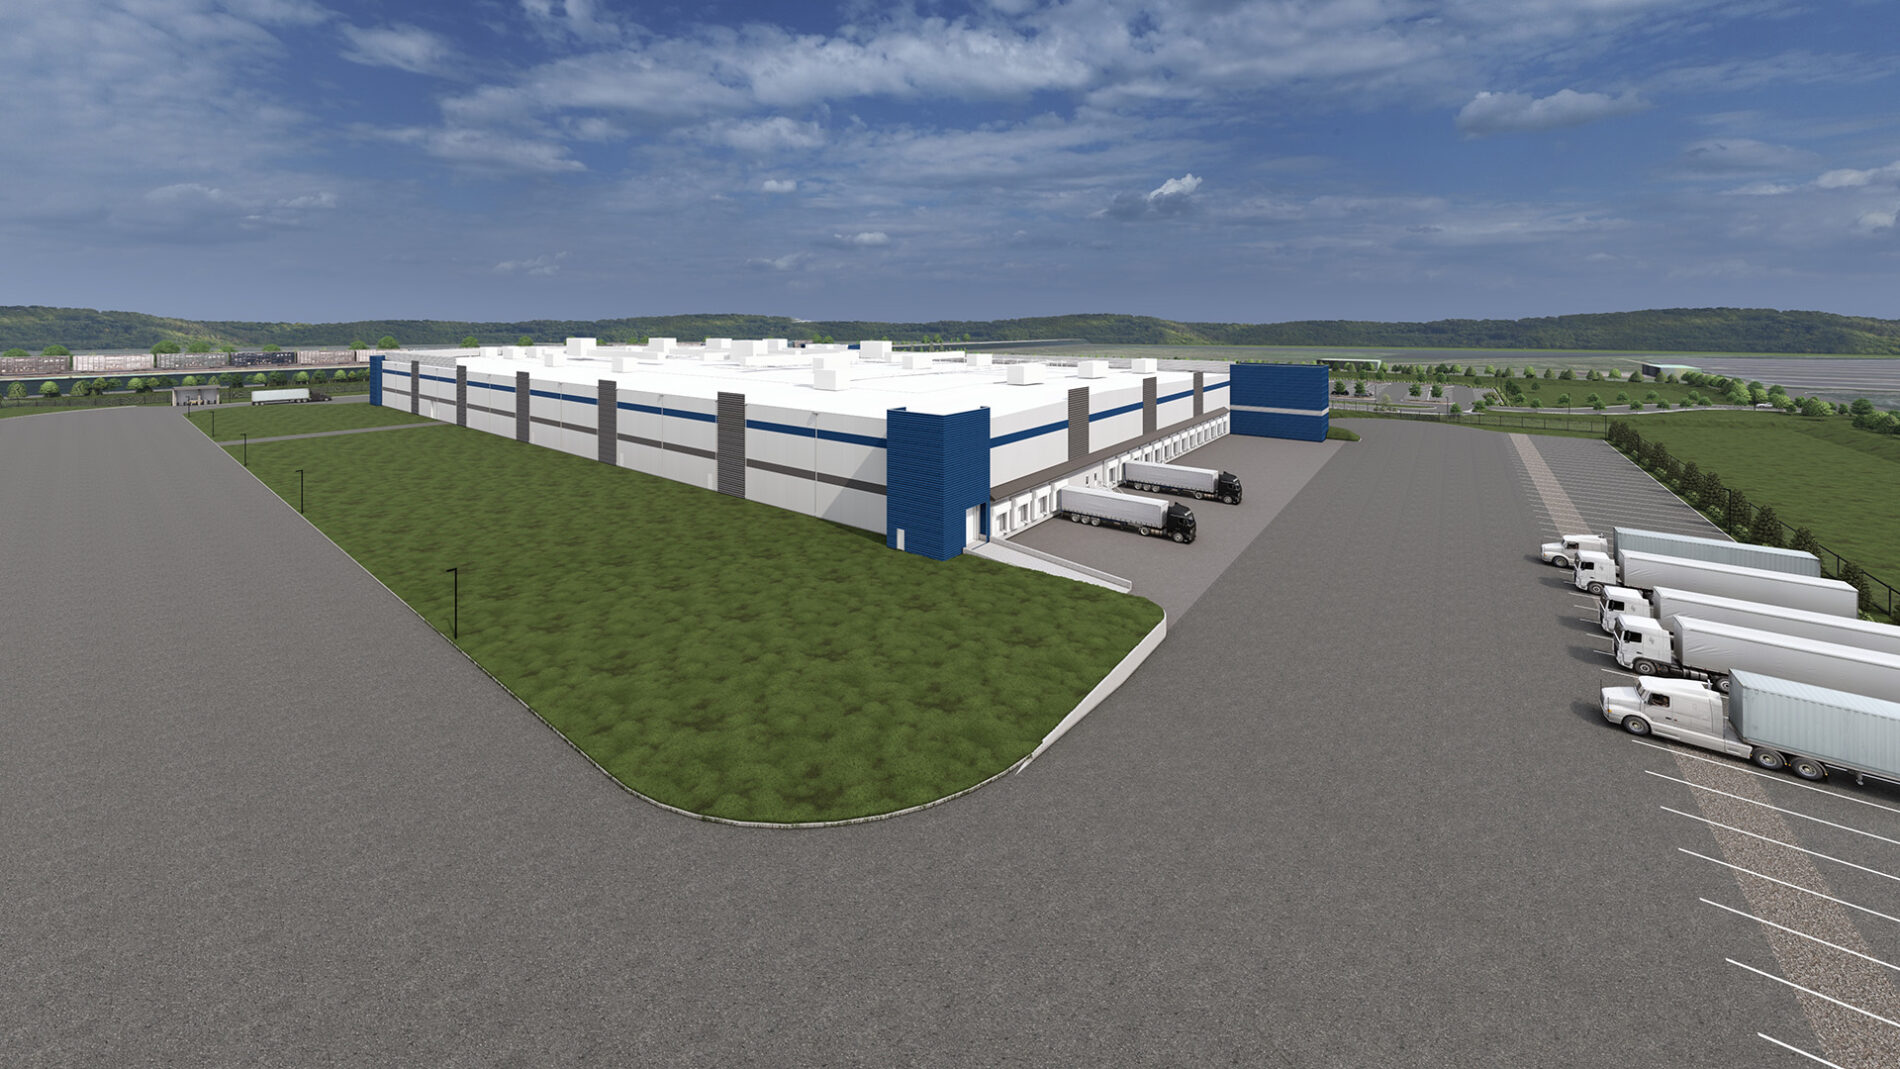 A rendering of a 330,000 square foot beef processing facility being designed and built by McCownGordon